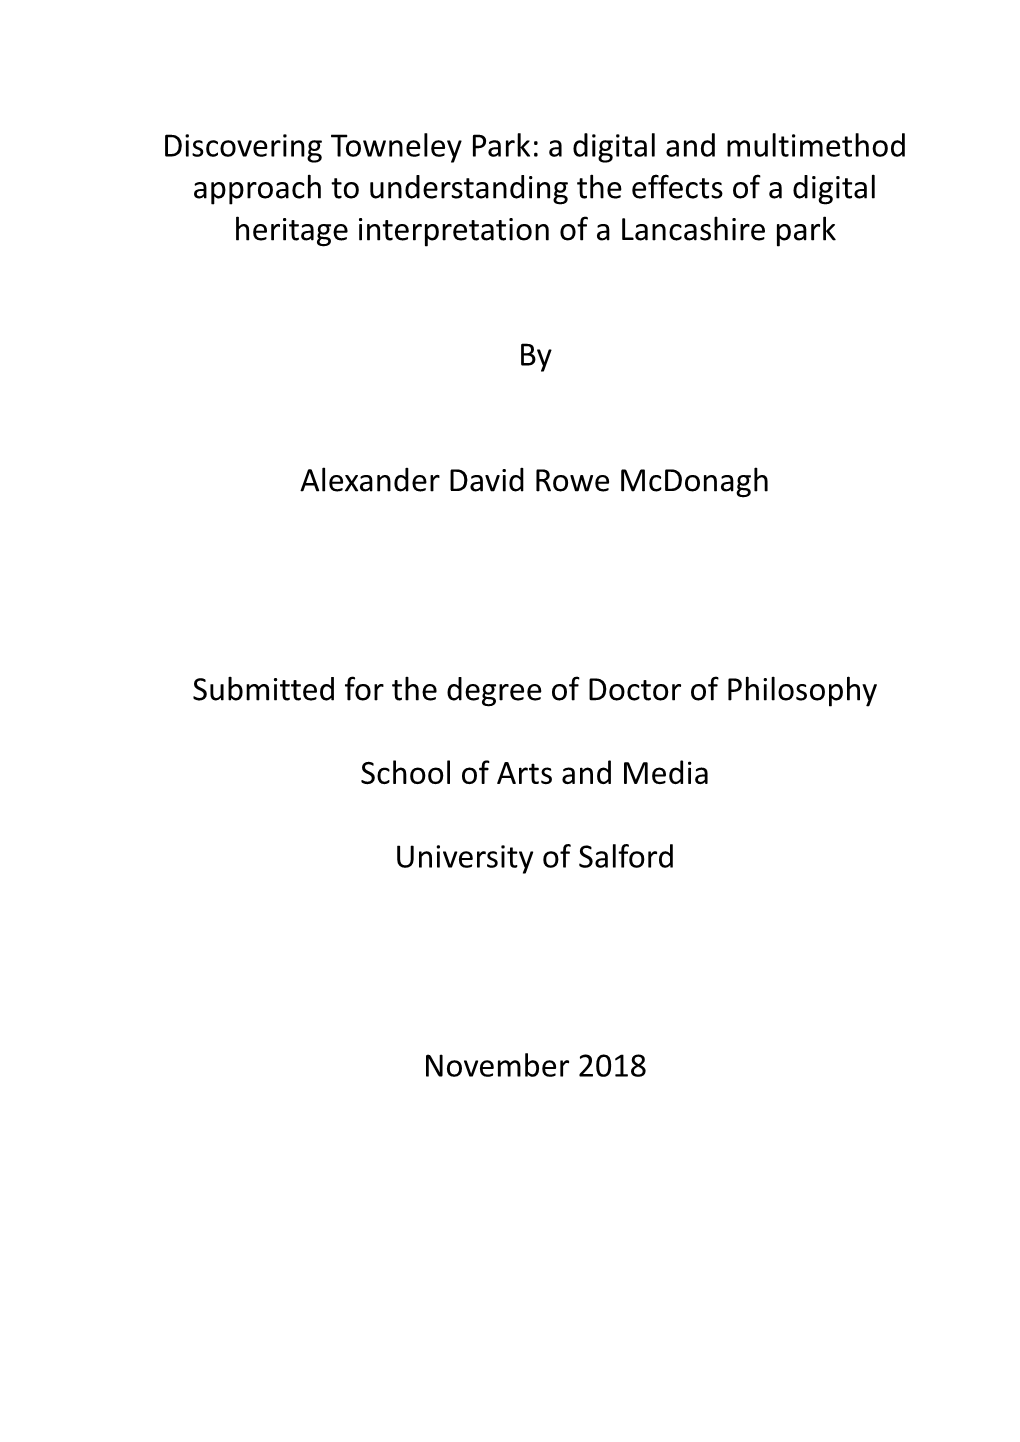 Discovering Towneley Park: a Digital and Multimethod Approach to Understanding the Effects of a Digital Heritage Interpretation of a Lancashire Park